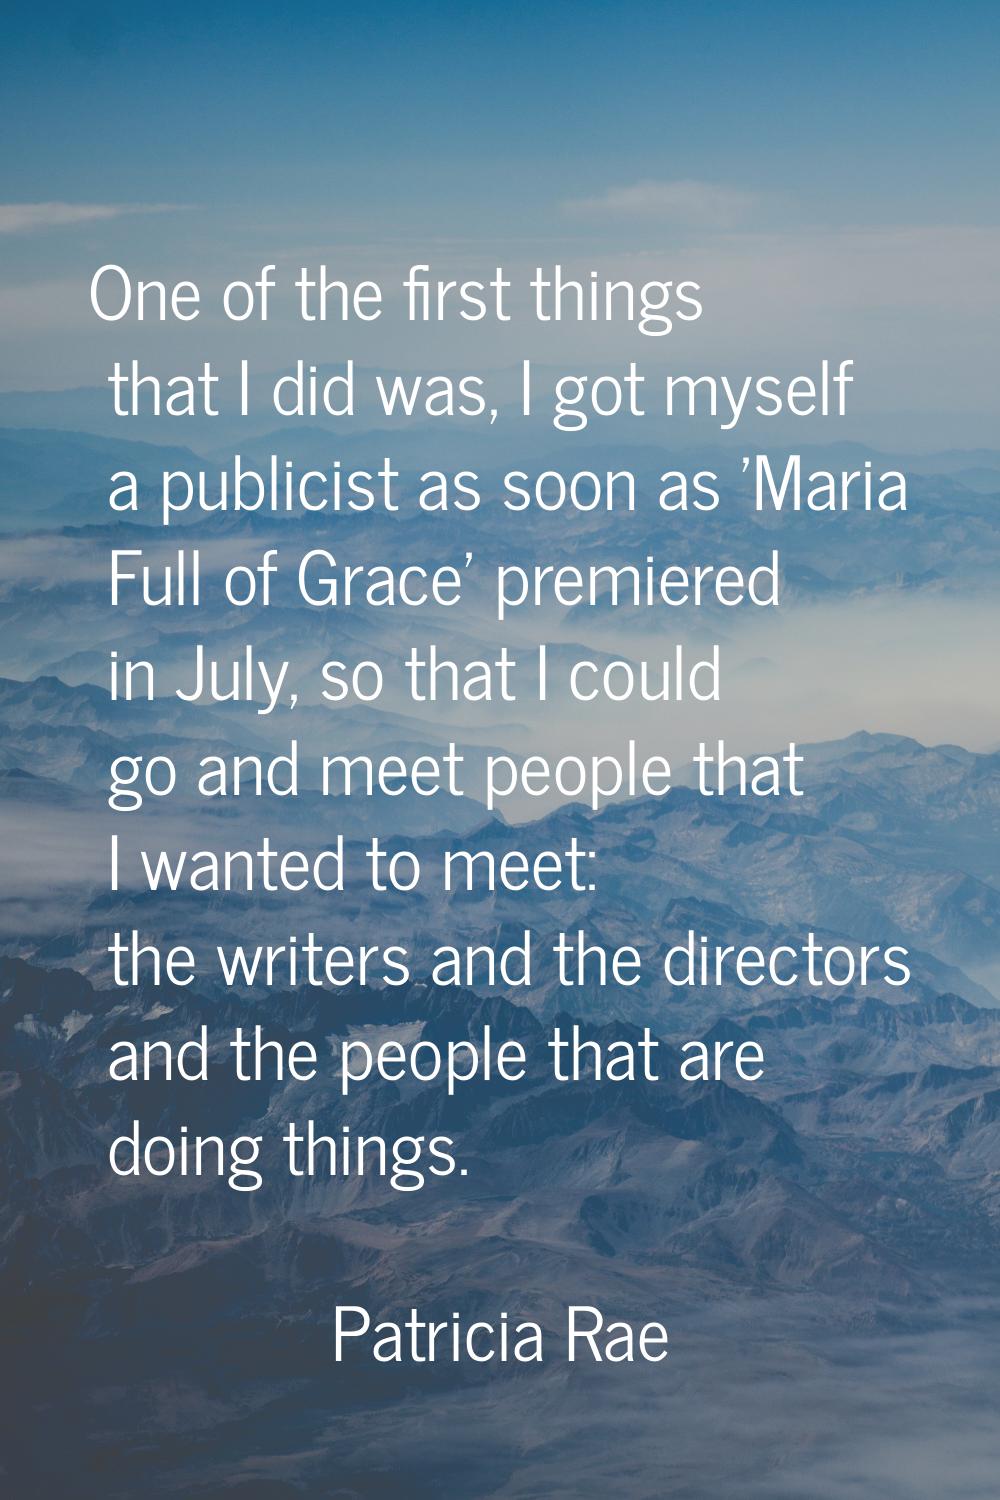 One of the first things that I did was, I got myself a publicist as soon as 'Maria Full of Grace' p